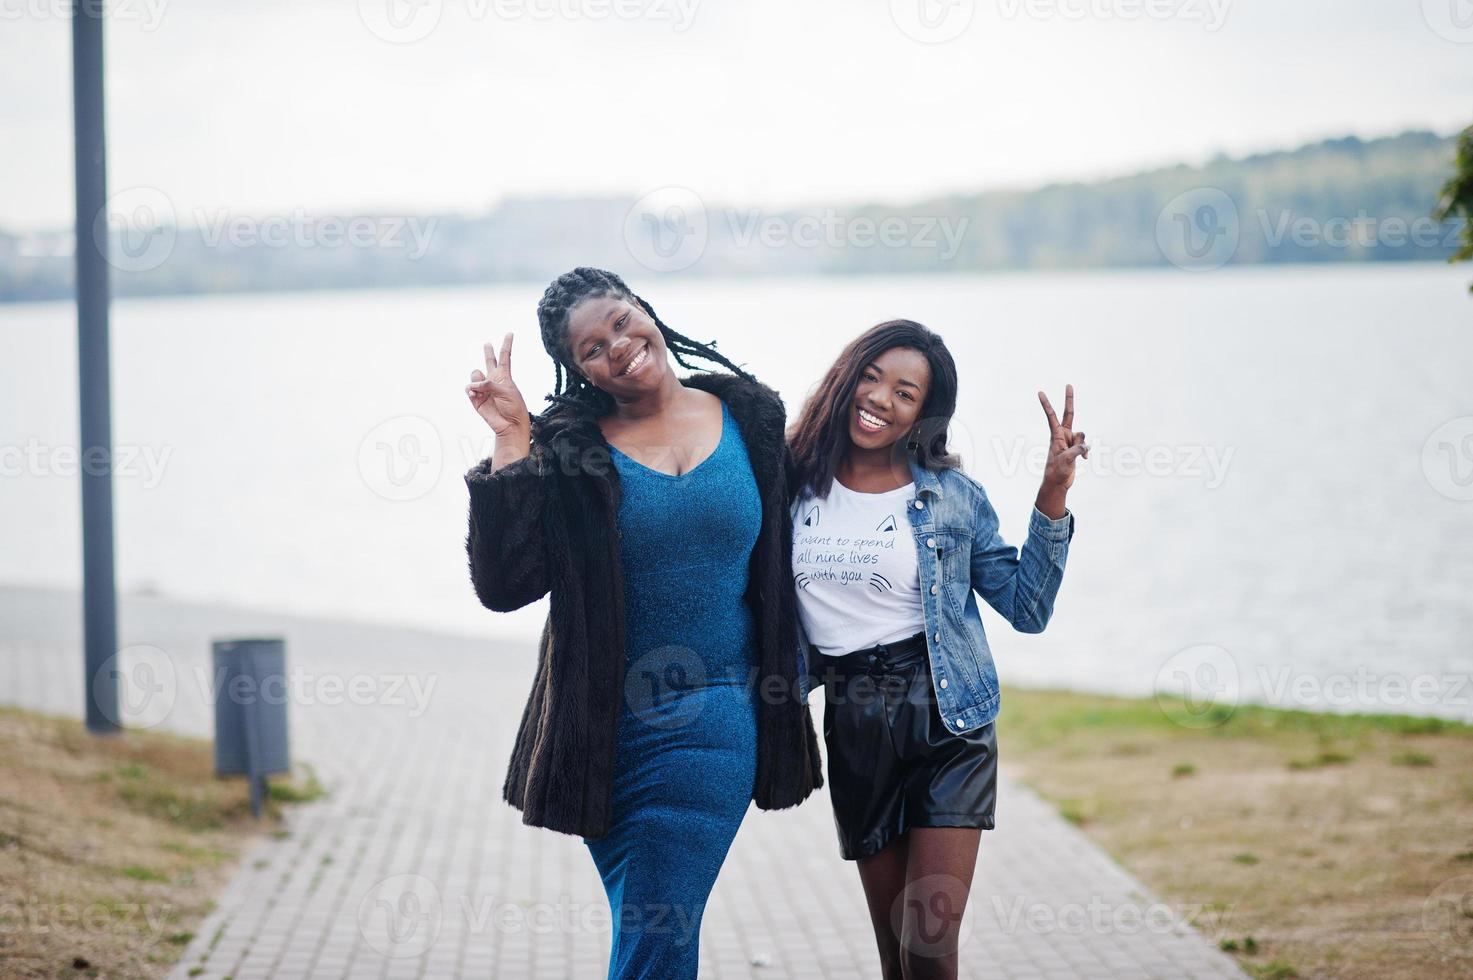 Two african american dark skinned friends female. One of them plus size model, second slim. Having fun and spending time together. photo